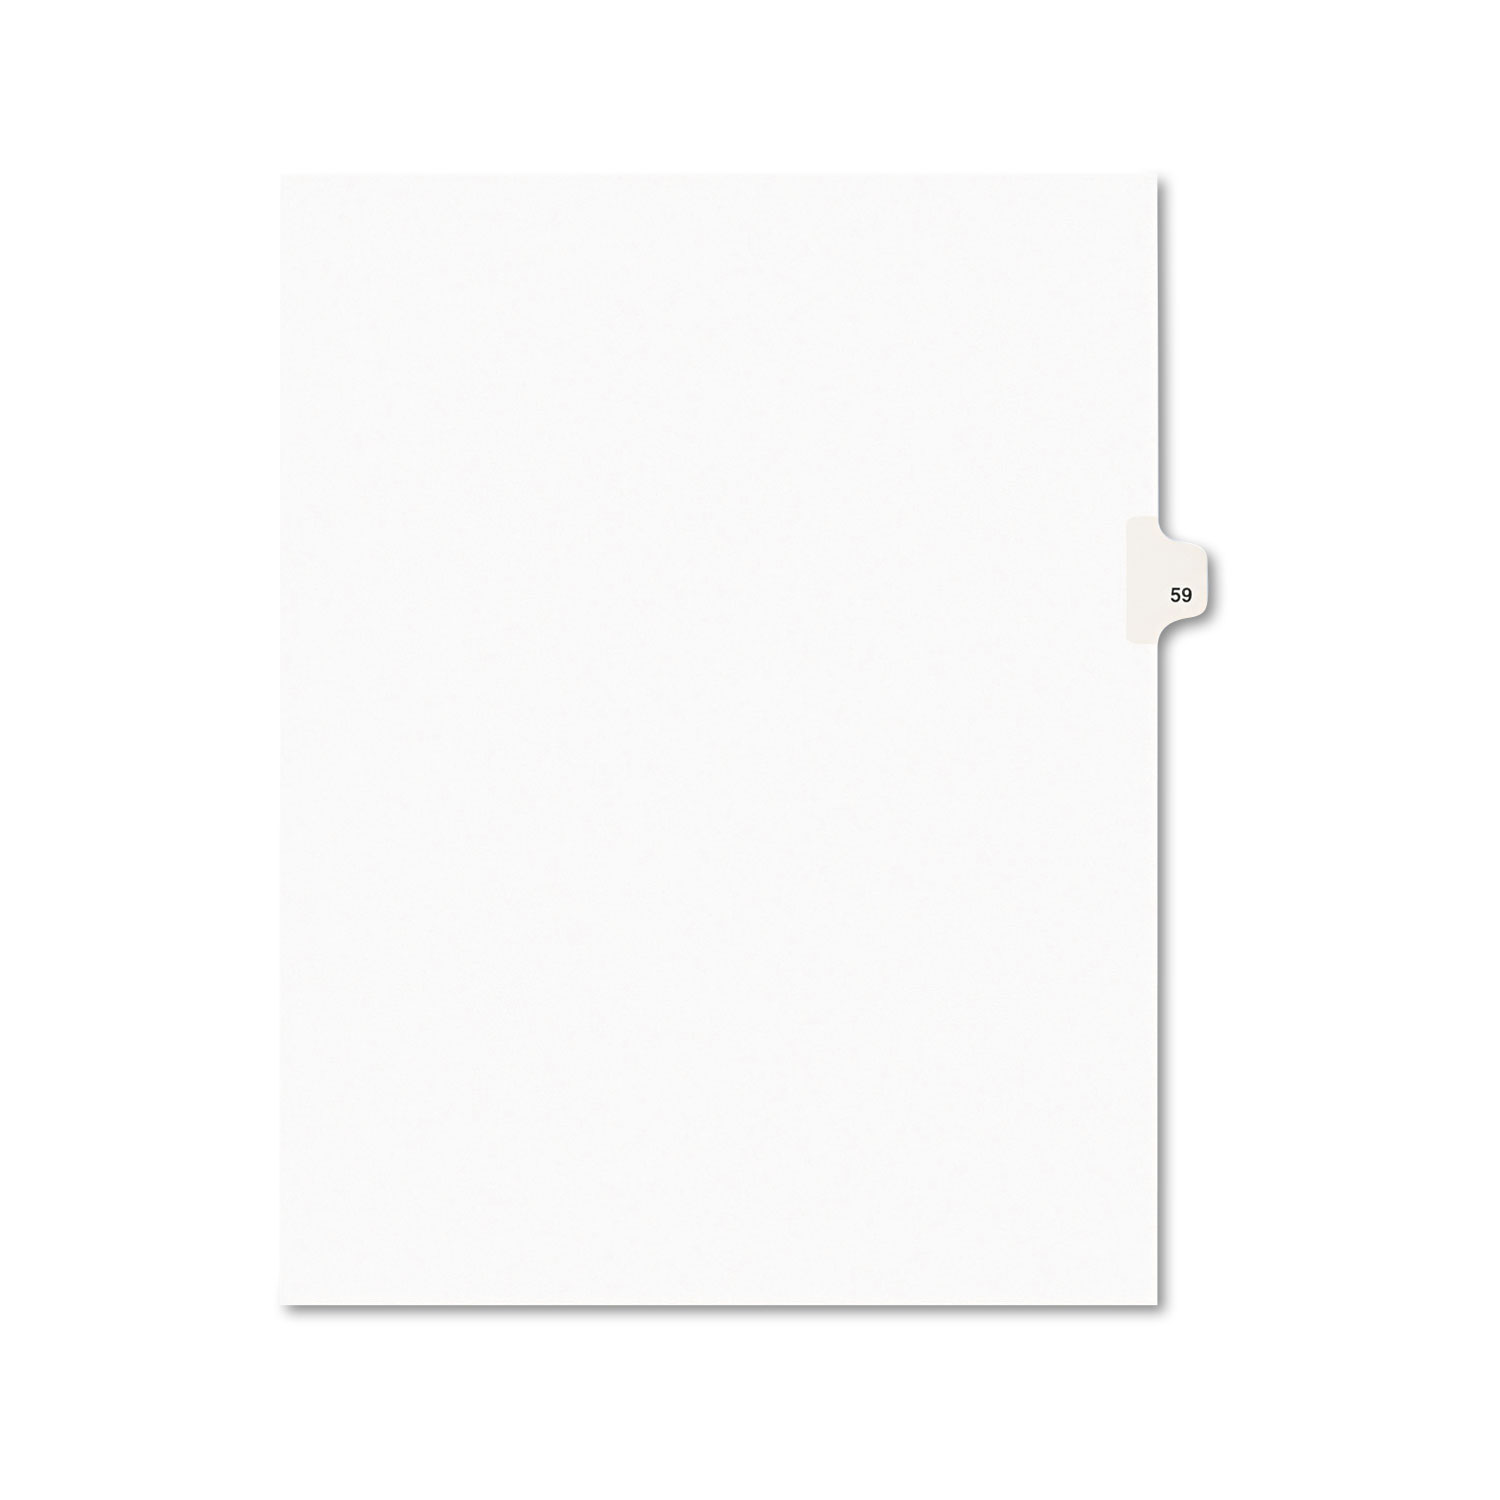  Avery 01059 Preprinted Legal Exhibit Side Tab Index Dividers, Avery Style, 10-Tab, 59, 11 x 8.5, White, 25/Pack (AVE01059) 